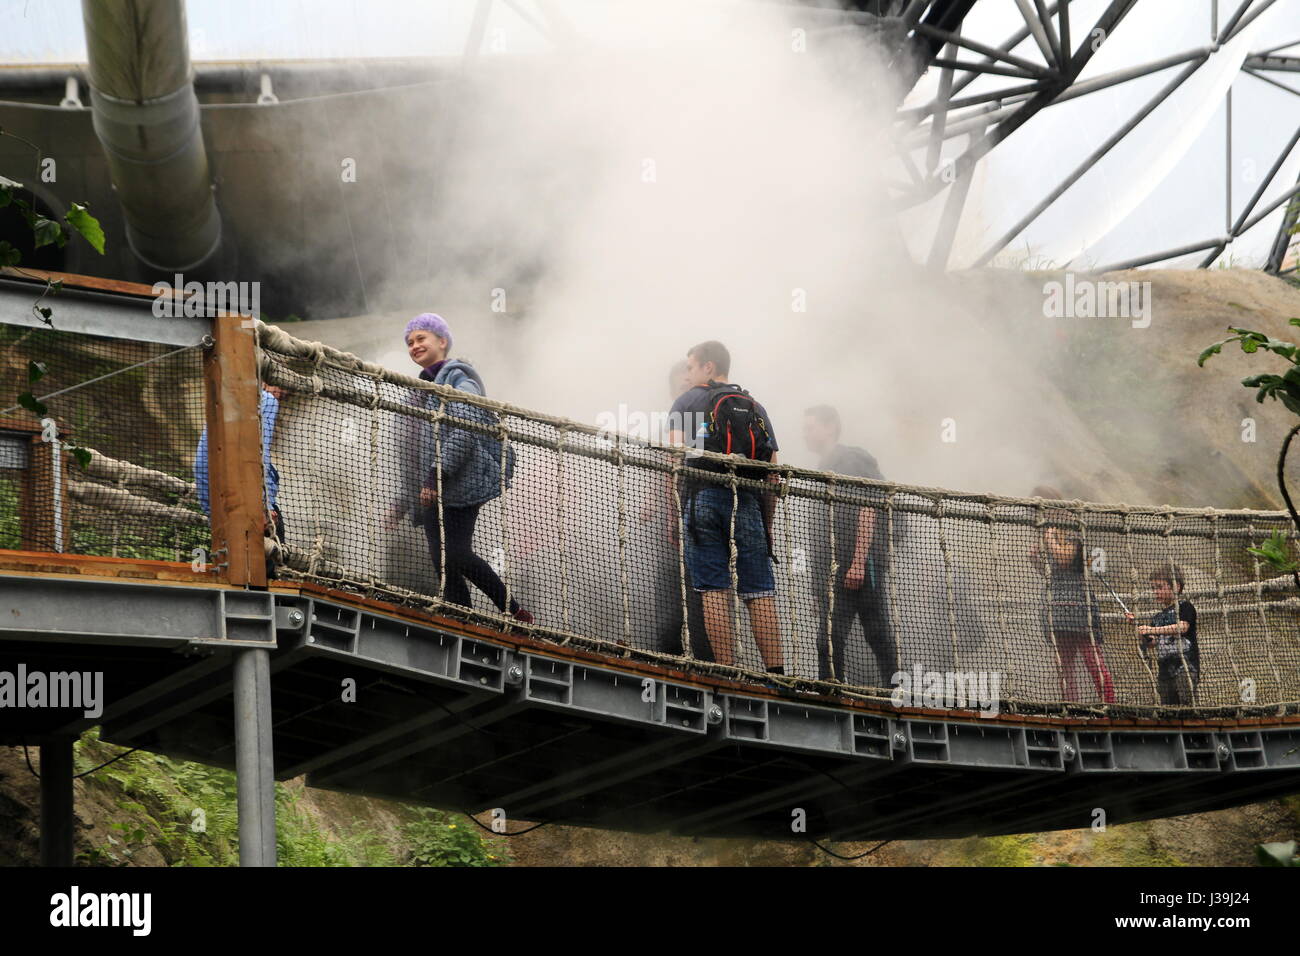 Bodelva, Cornwall, UK - April 4 2017: Unidentified guests in a cloud of steam in the Tropical biome at the Eden Project in Cornwall, England Stock Photo